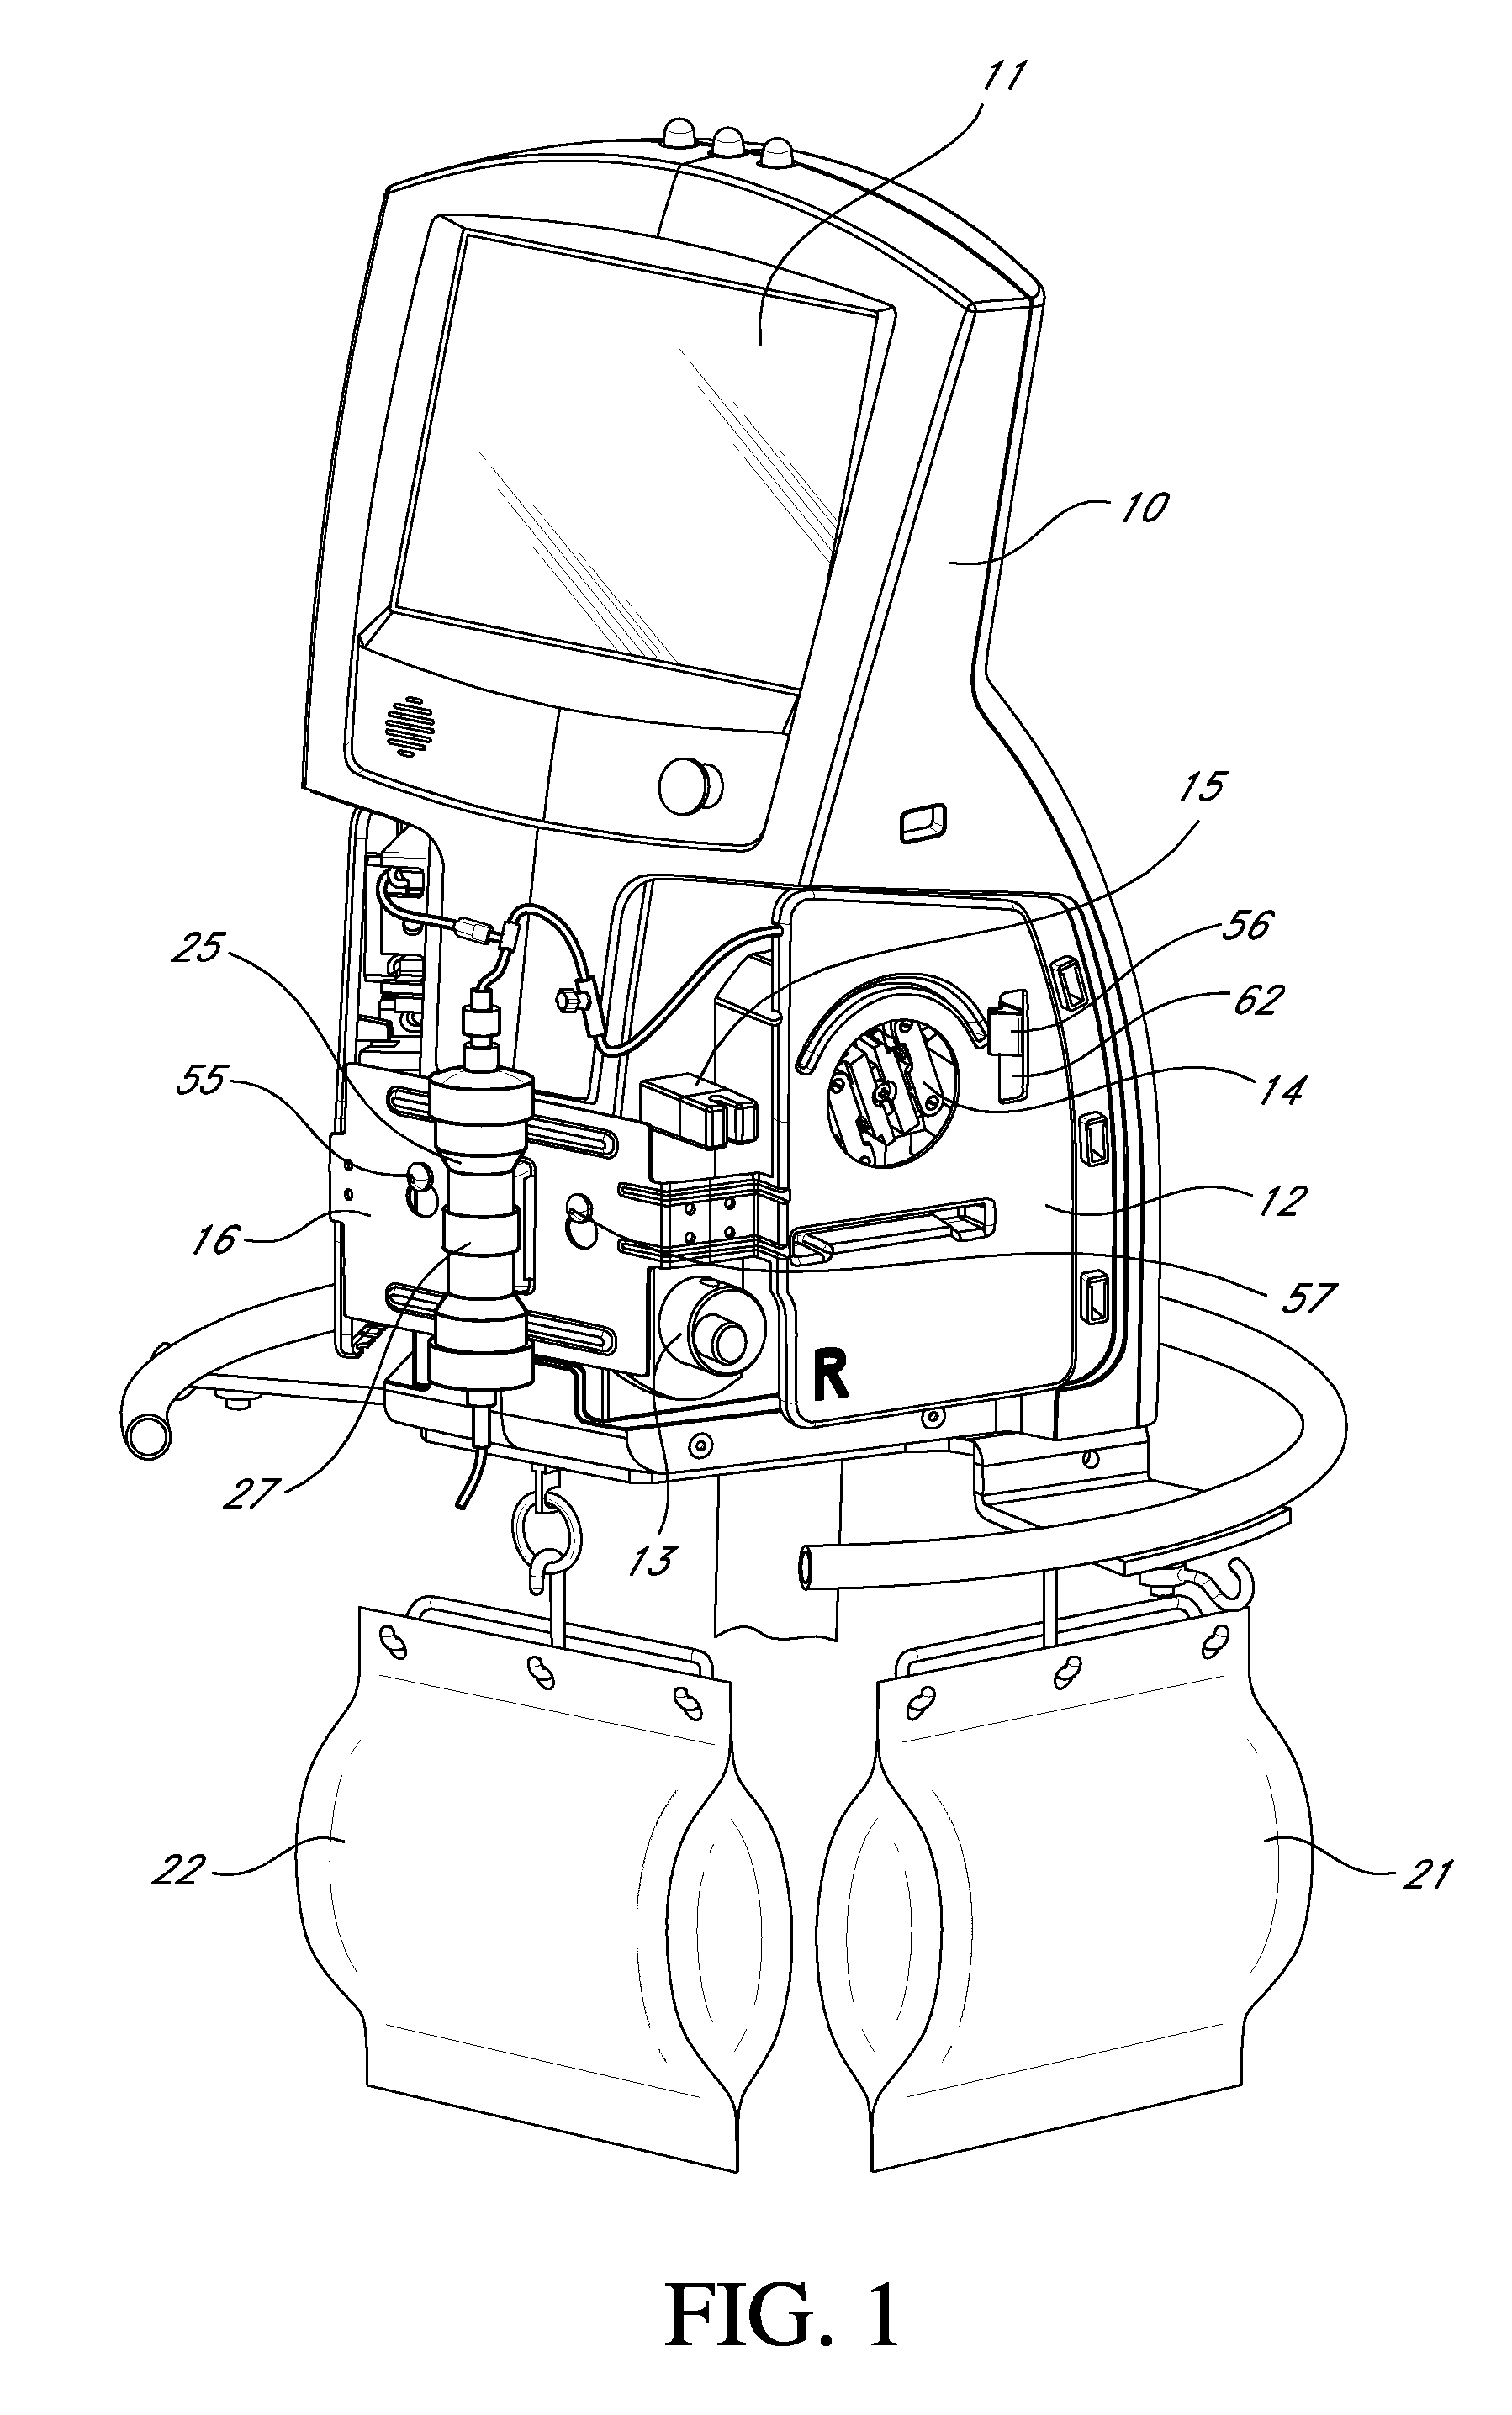 Modular hemofiltration apparatus with interactive operator instructions and control system